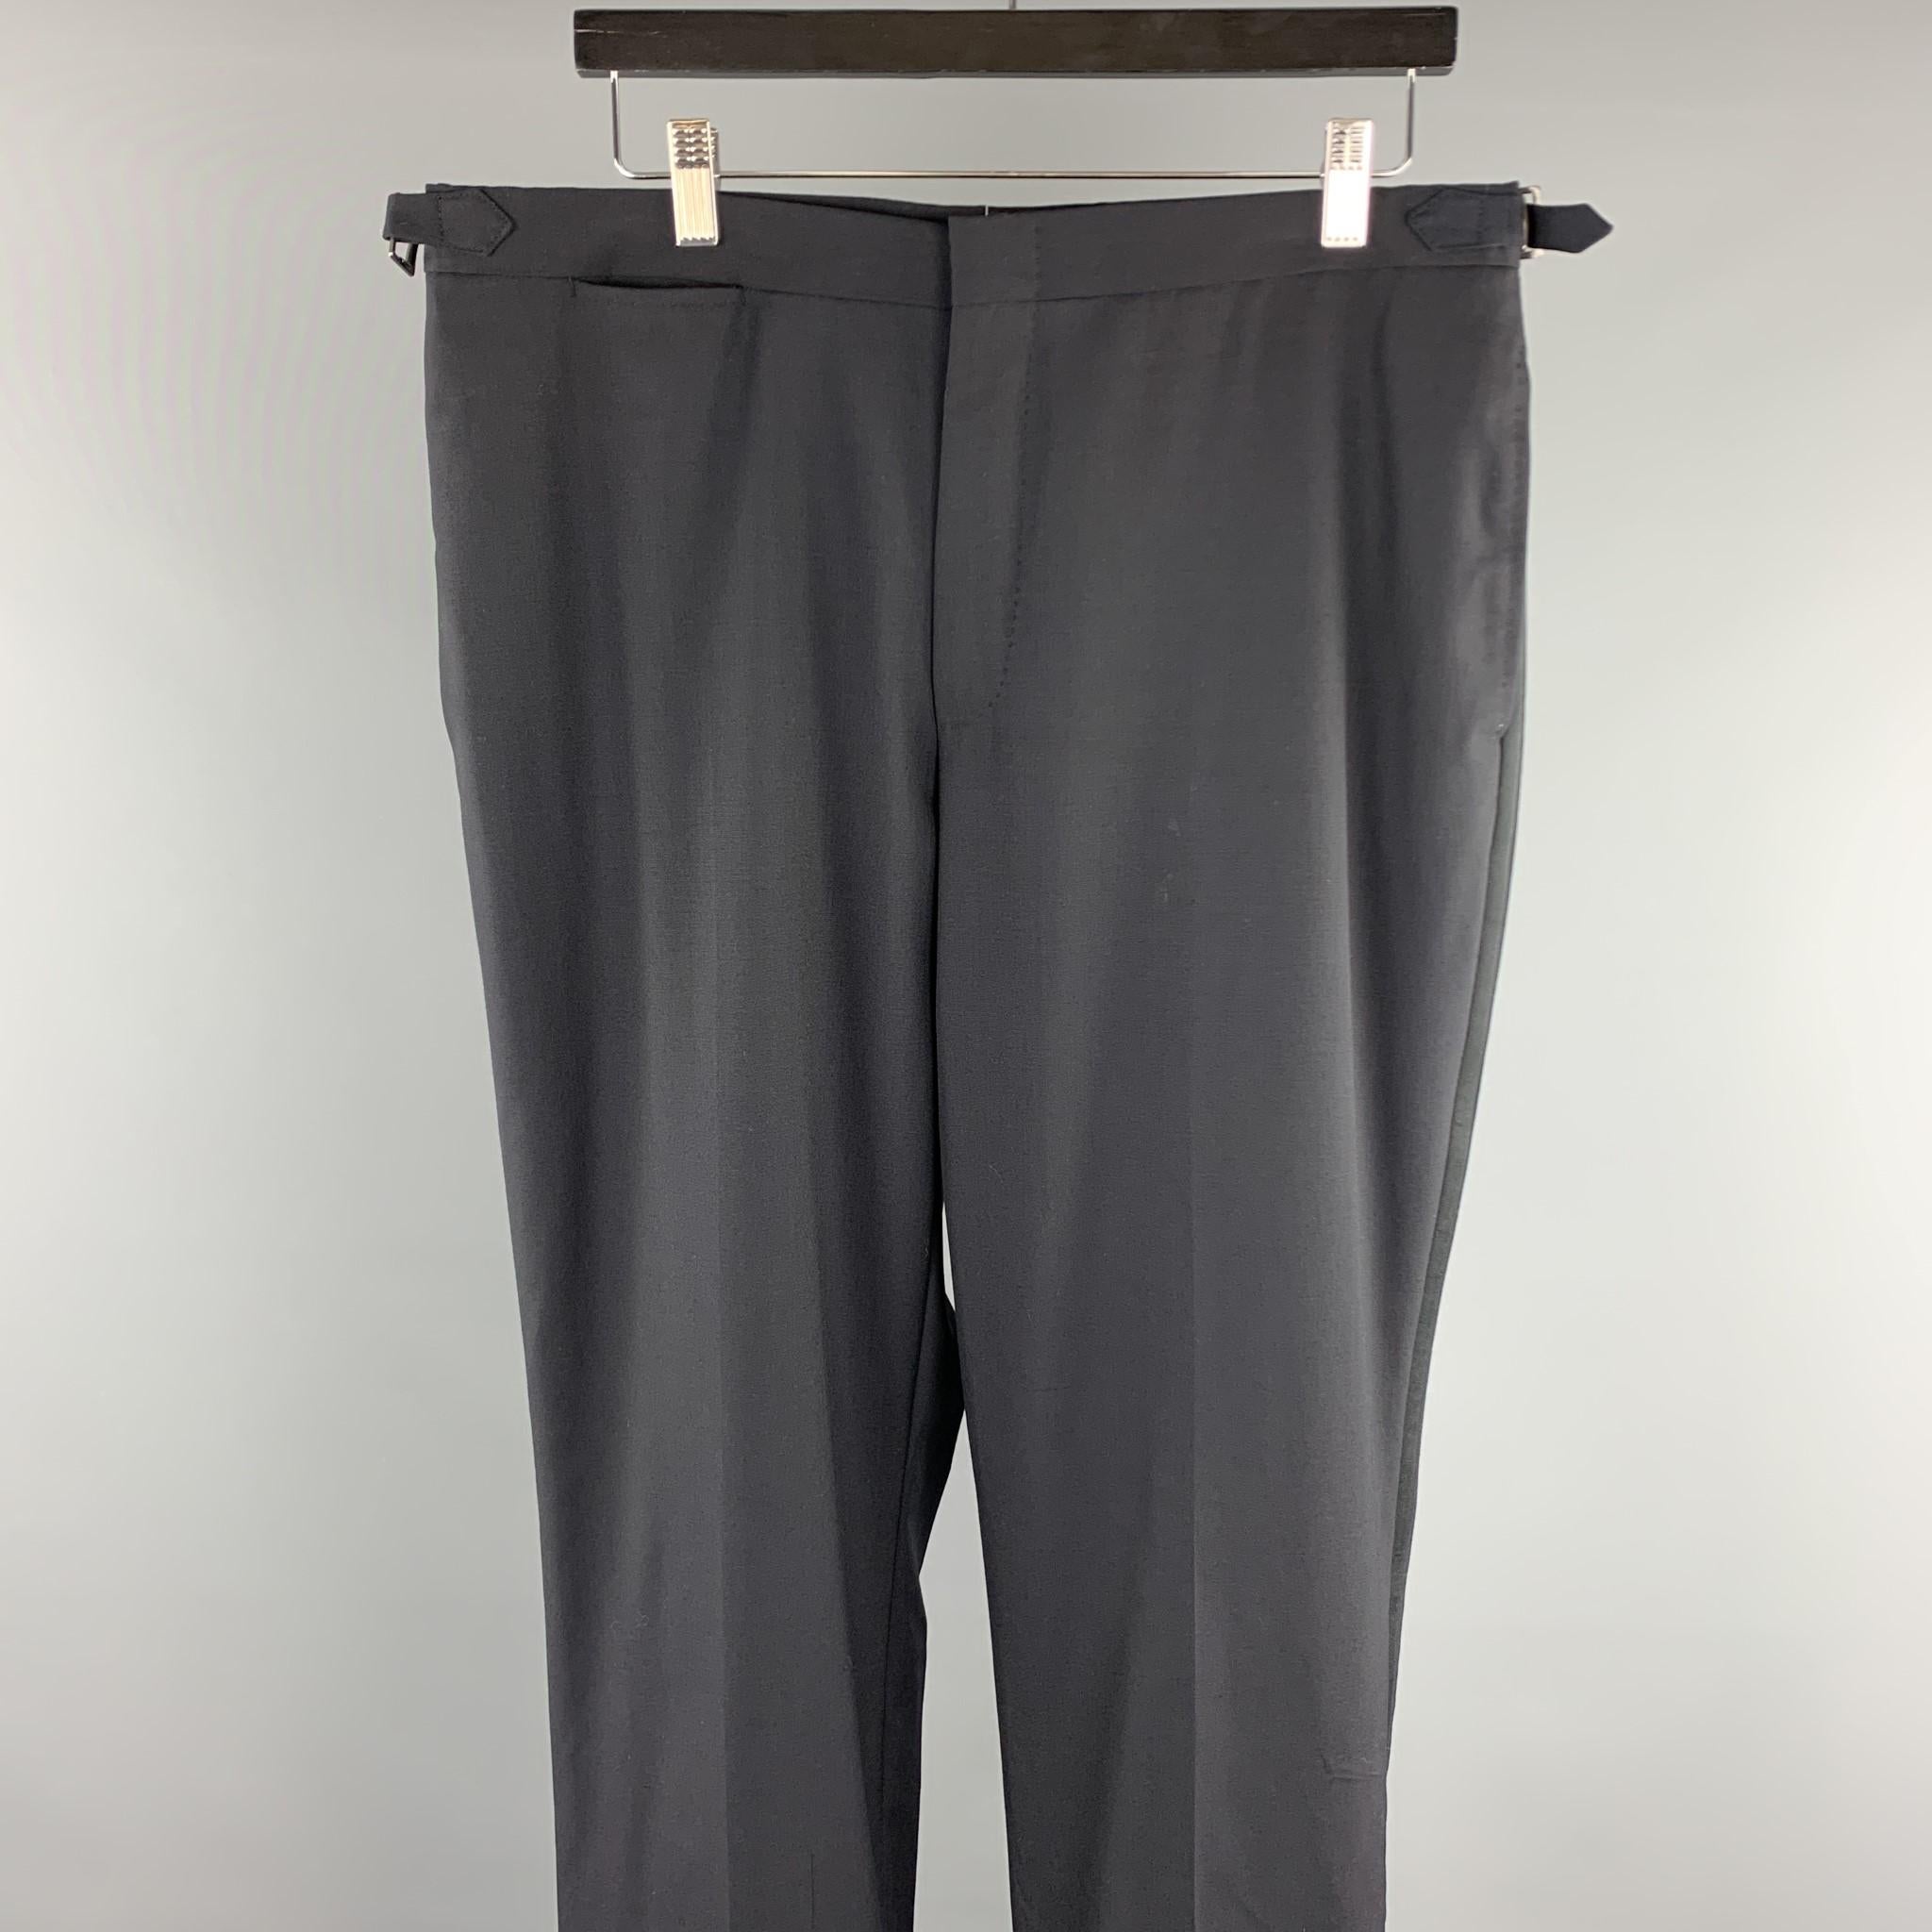 DUNHILL dress pants comes in a black wool featuring a tuxedo style, side tabs, and a zip fly closure. 

Excellent Pre-Owned Condition.
Marked: ( No Sized Marked )

Measurements:

Waist: 34 in.
Rise: 10 in. 
Inseam: 32 in.